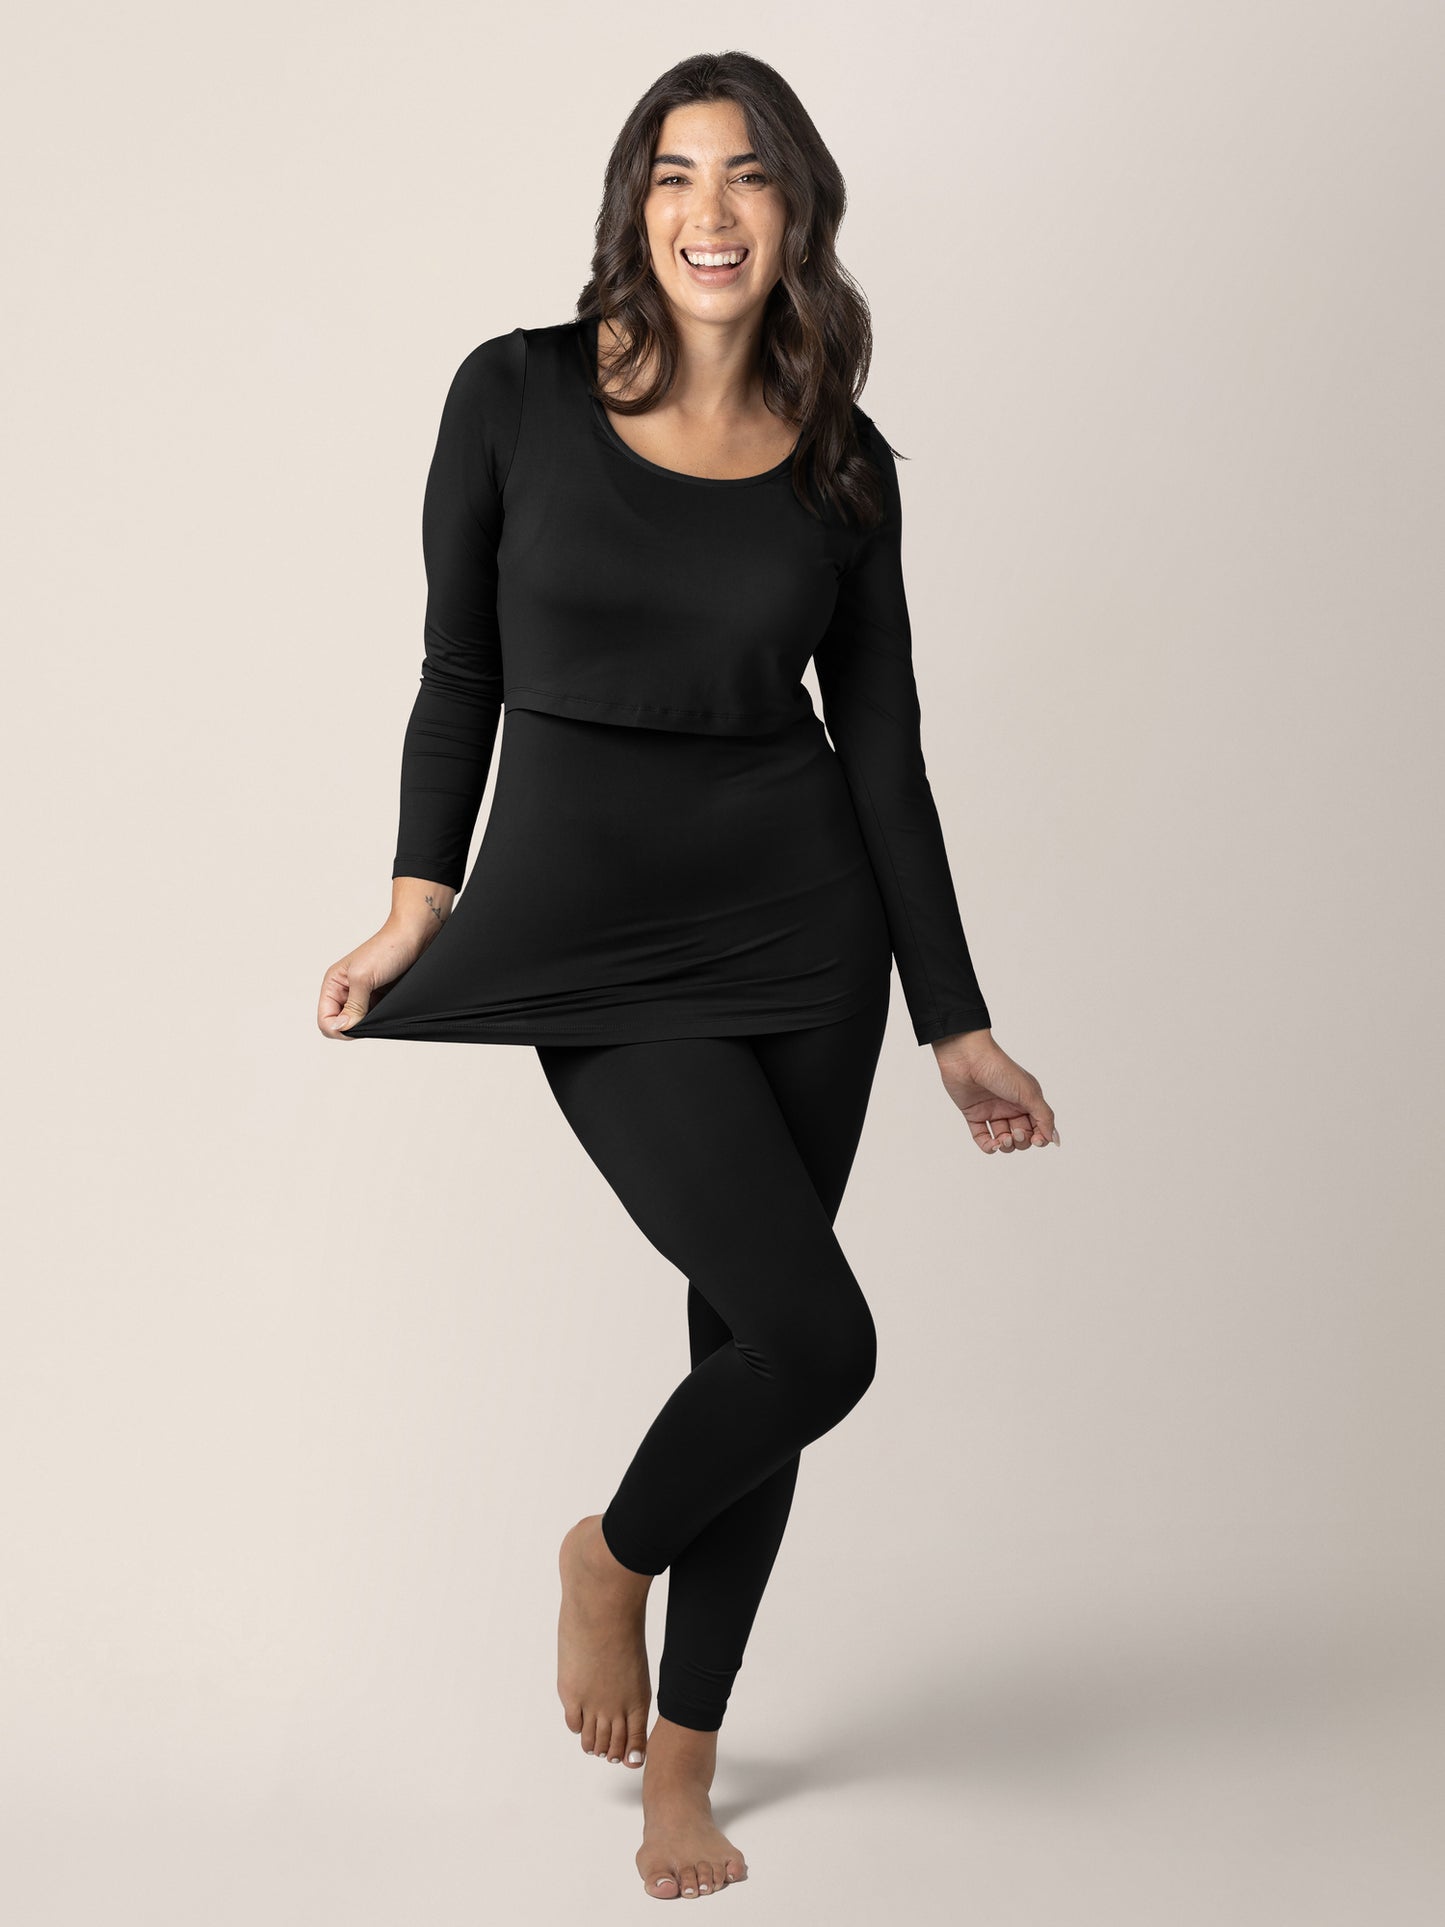 Model wearing the Jane Nursing Pajama Set in Black  with her hand on the hem.@model_info:Alexis is 5'10" and wearing a Medium.